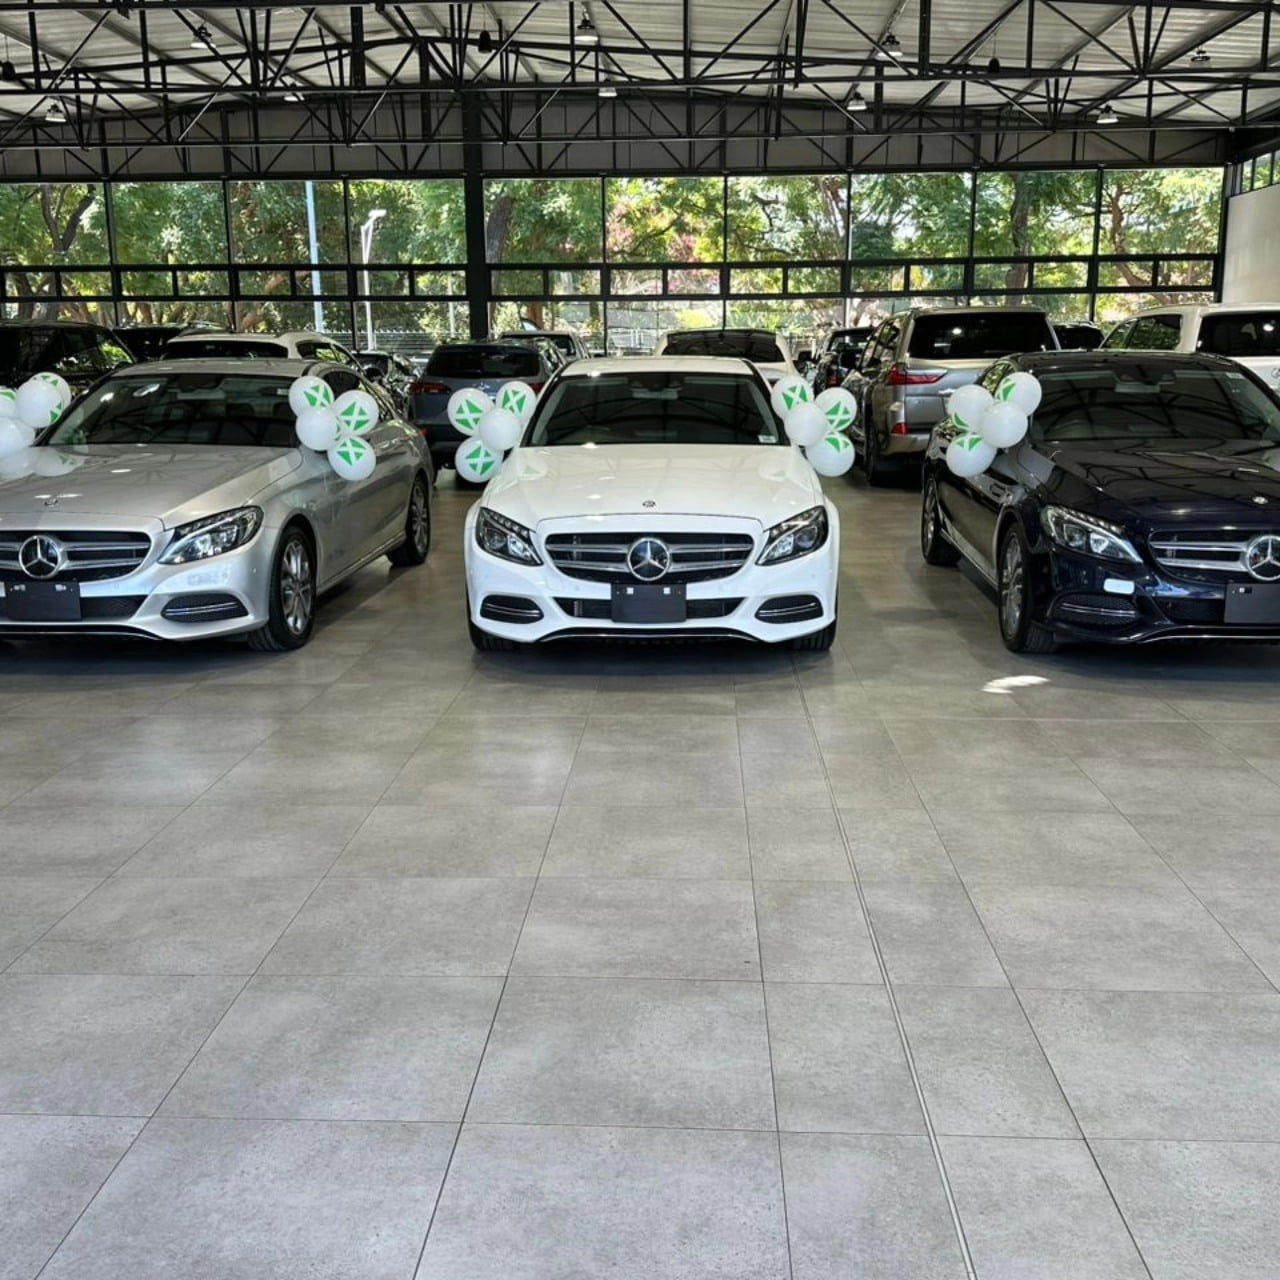 Sir Wicknell blesses Diana Samkange, Mathias Mhere & Andy Muridzo with Mercedes Benz C Classes